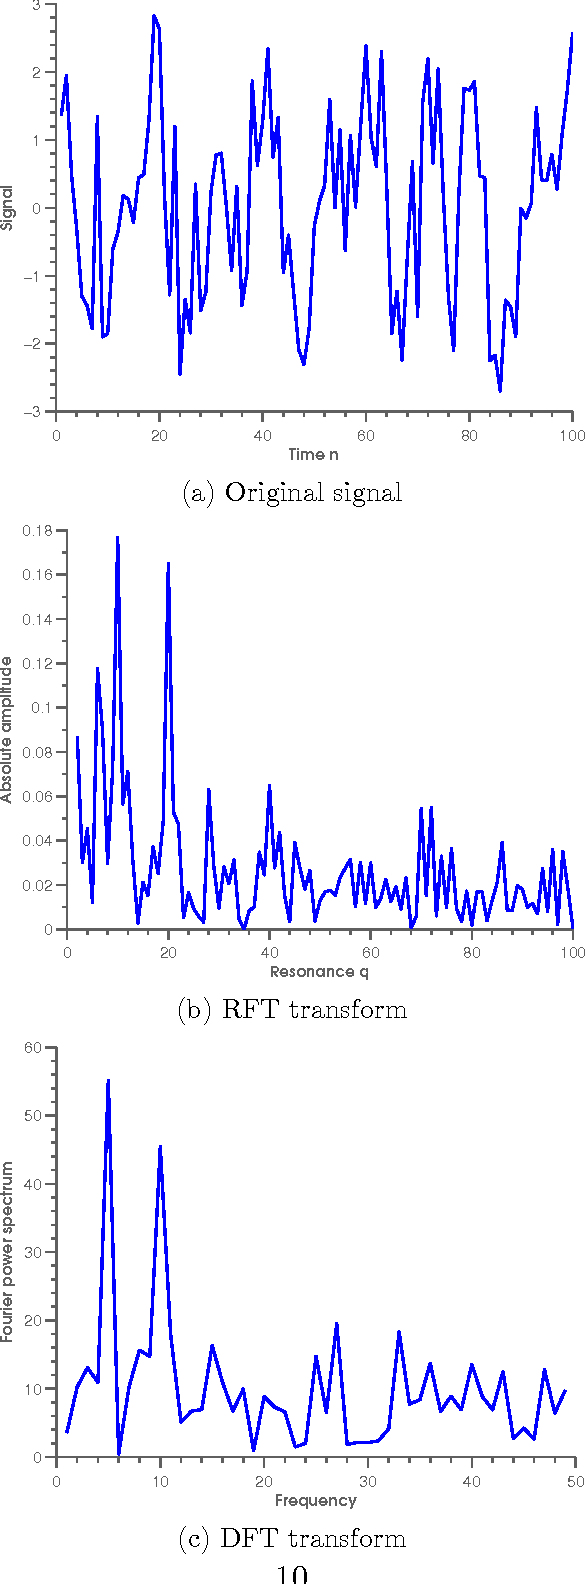 Figure 1 for A Novel Method for Comparative Analysis of DNA Sequences by Ramanujan-Fourier Transform